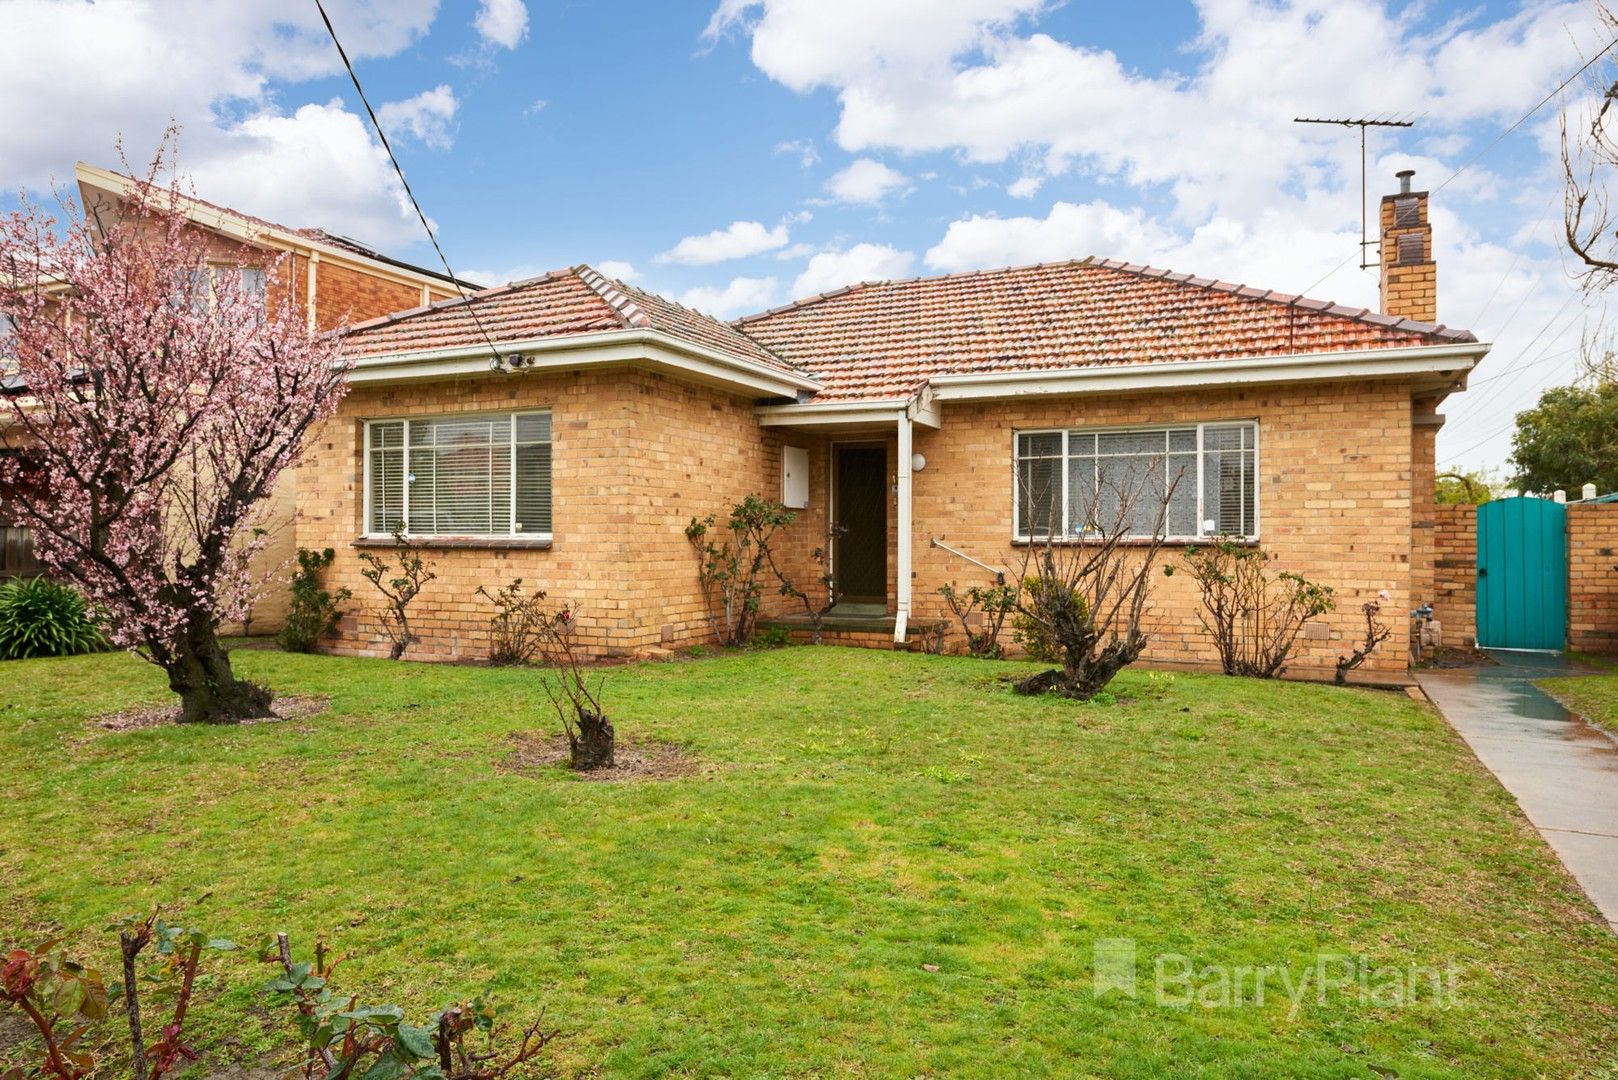 3 bedrooms House in 22 Belmont Street CLAYTON VIC, 3168